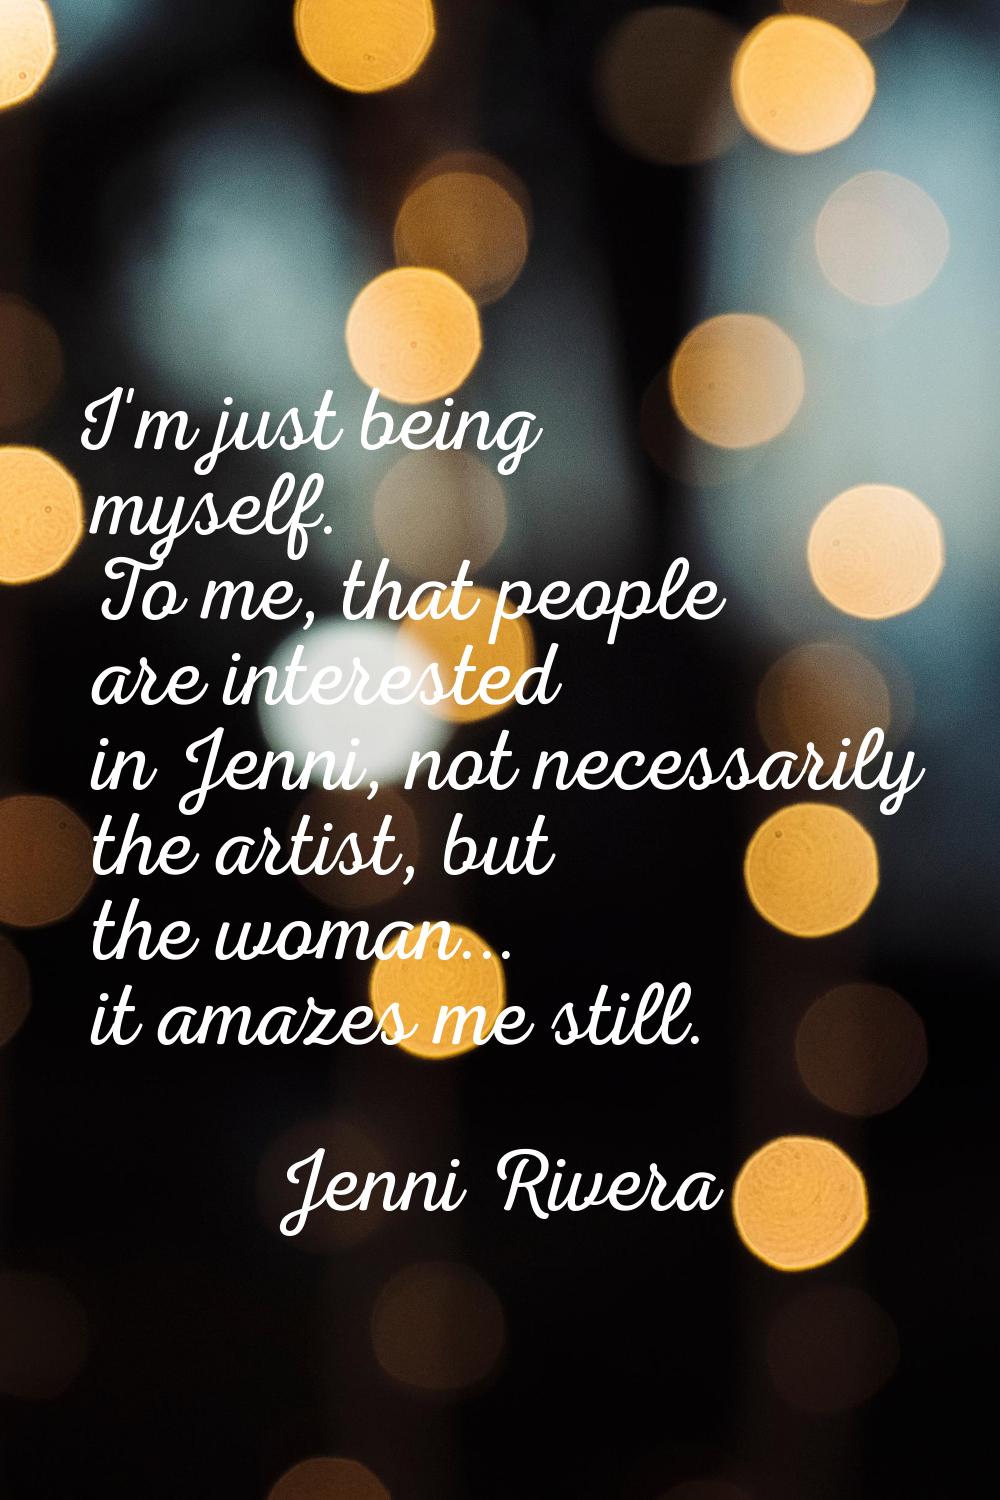 I'm just being myself. To me, that people are interested in Jenni, not necessarily the artist, but 